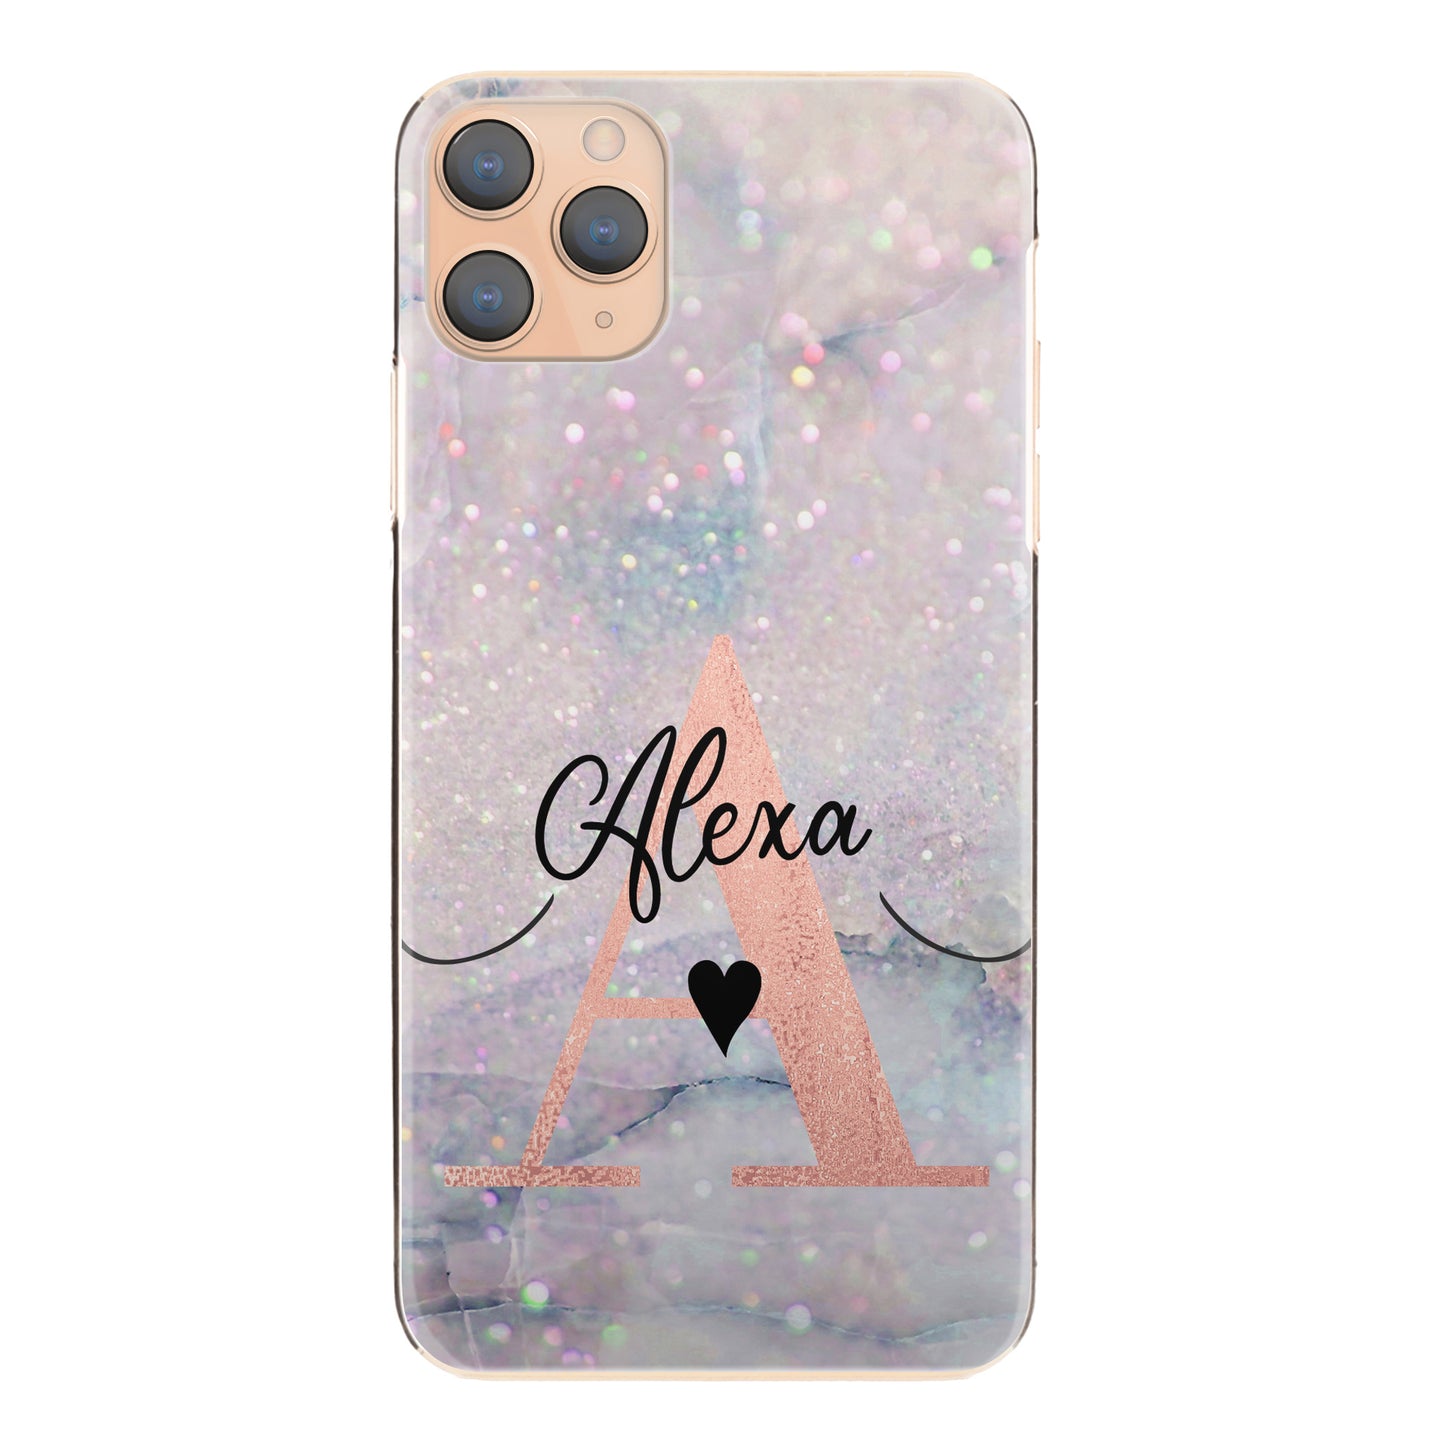 Personalised Oppo Phone Hard Case with Stylish Heart Text and Pink Initial on Textured Glitter Effect